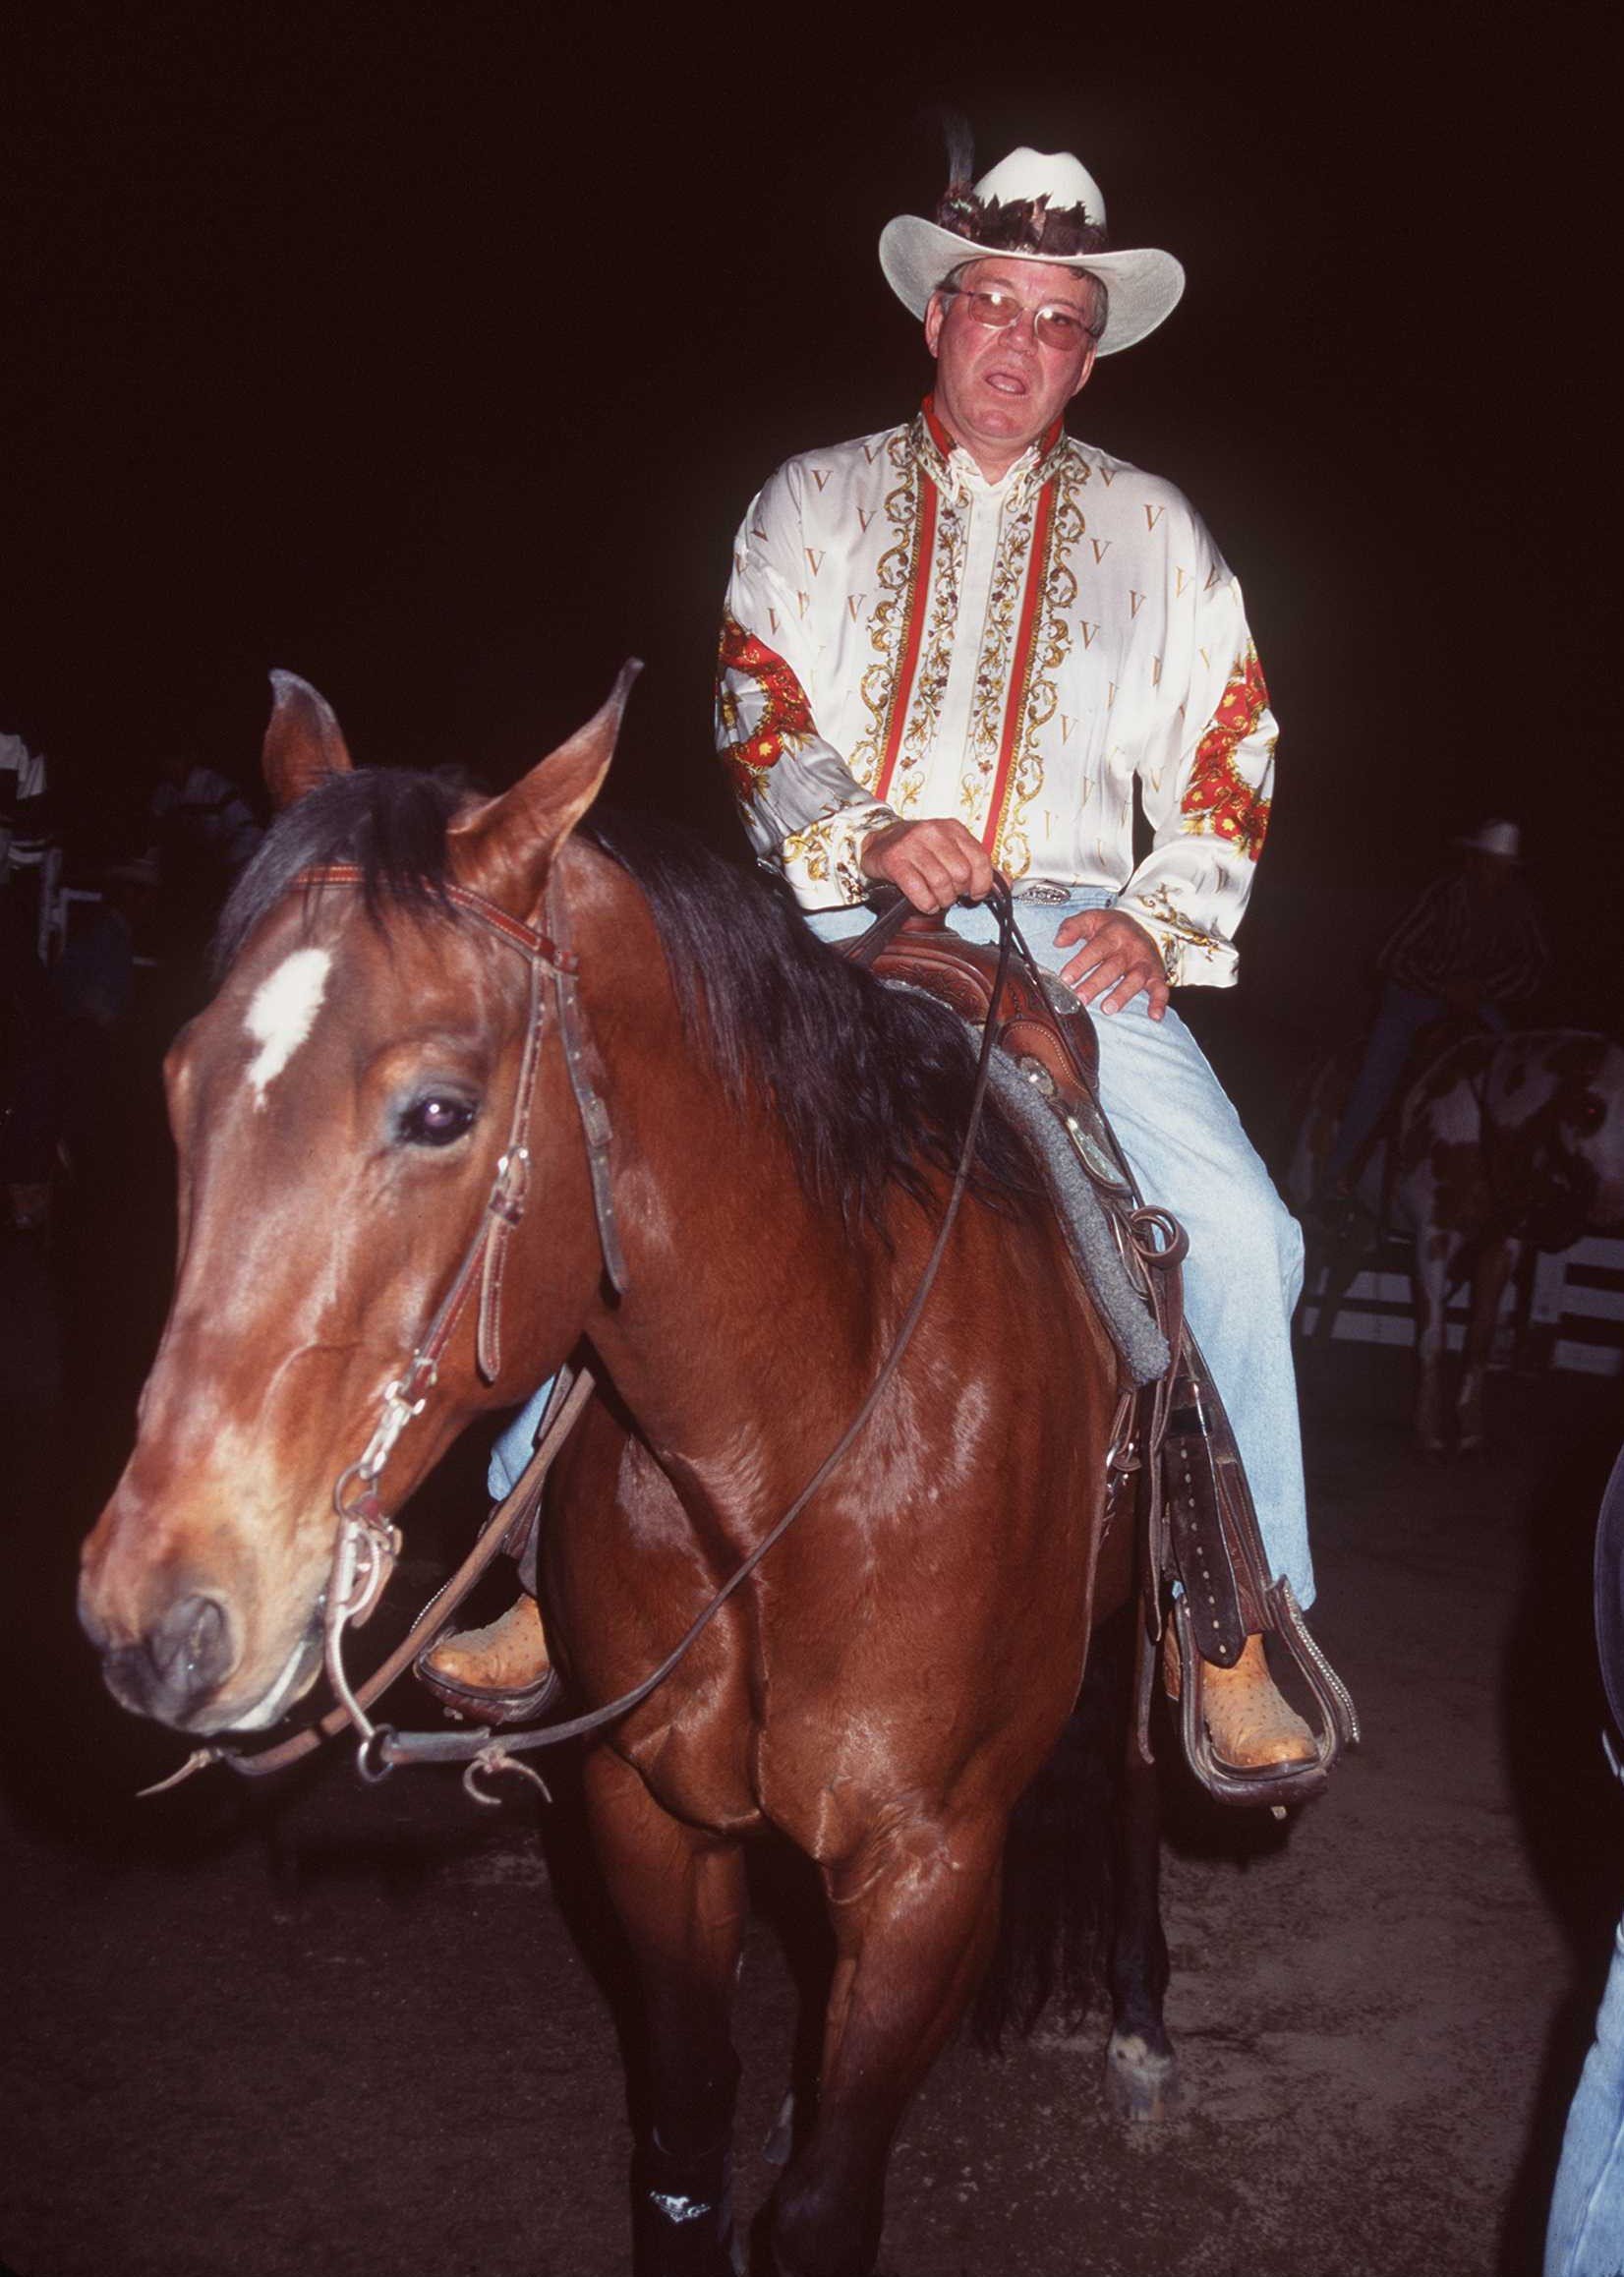 William Shatner and his girlfriend Nerine Kidd are hosting the 7th annual Hollywood Charity Horse Show $20,000 Reining Royale on April 26, 1997, at the Los Angeles Equistrian Center. | Source: Getty Images